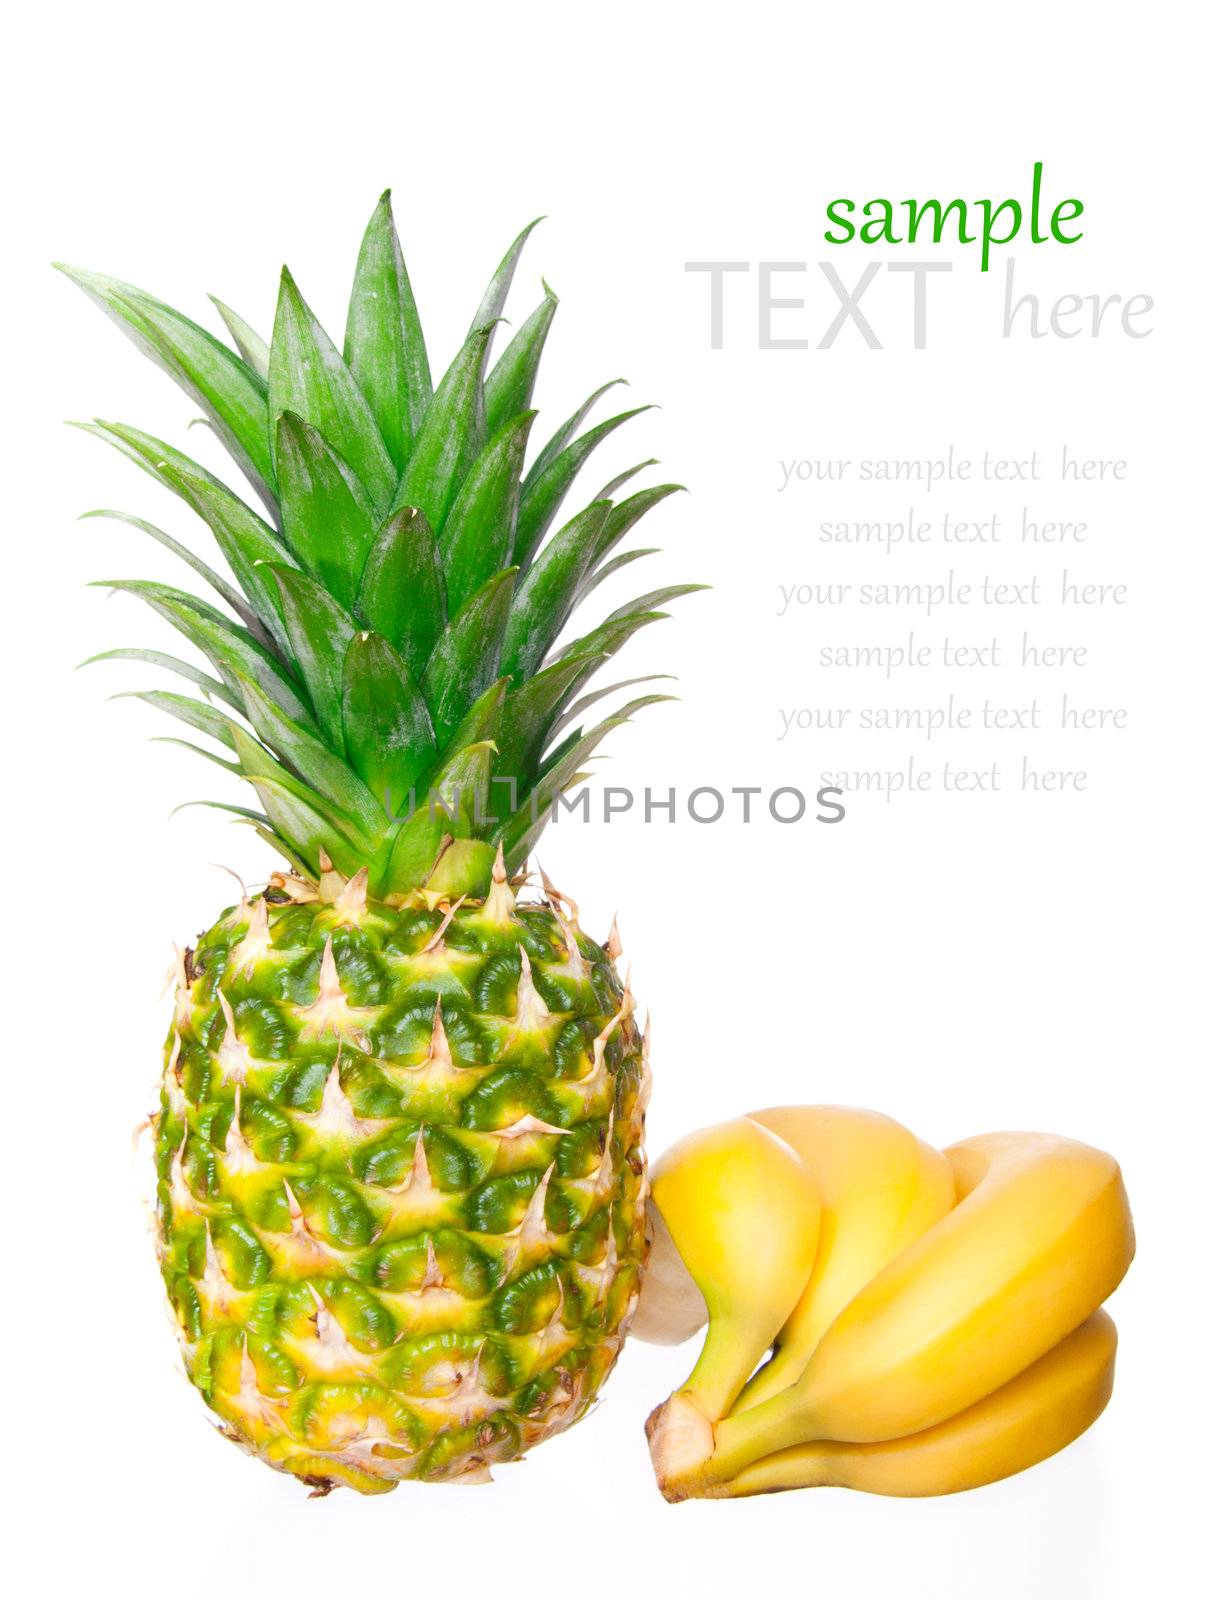 ripe pineapple, bunch of bananas on a white background 